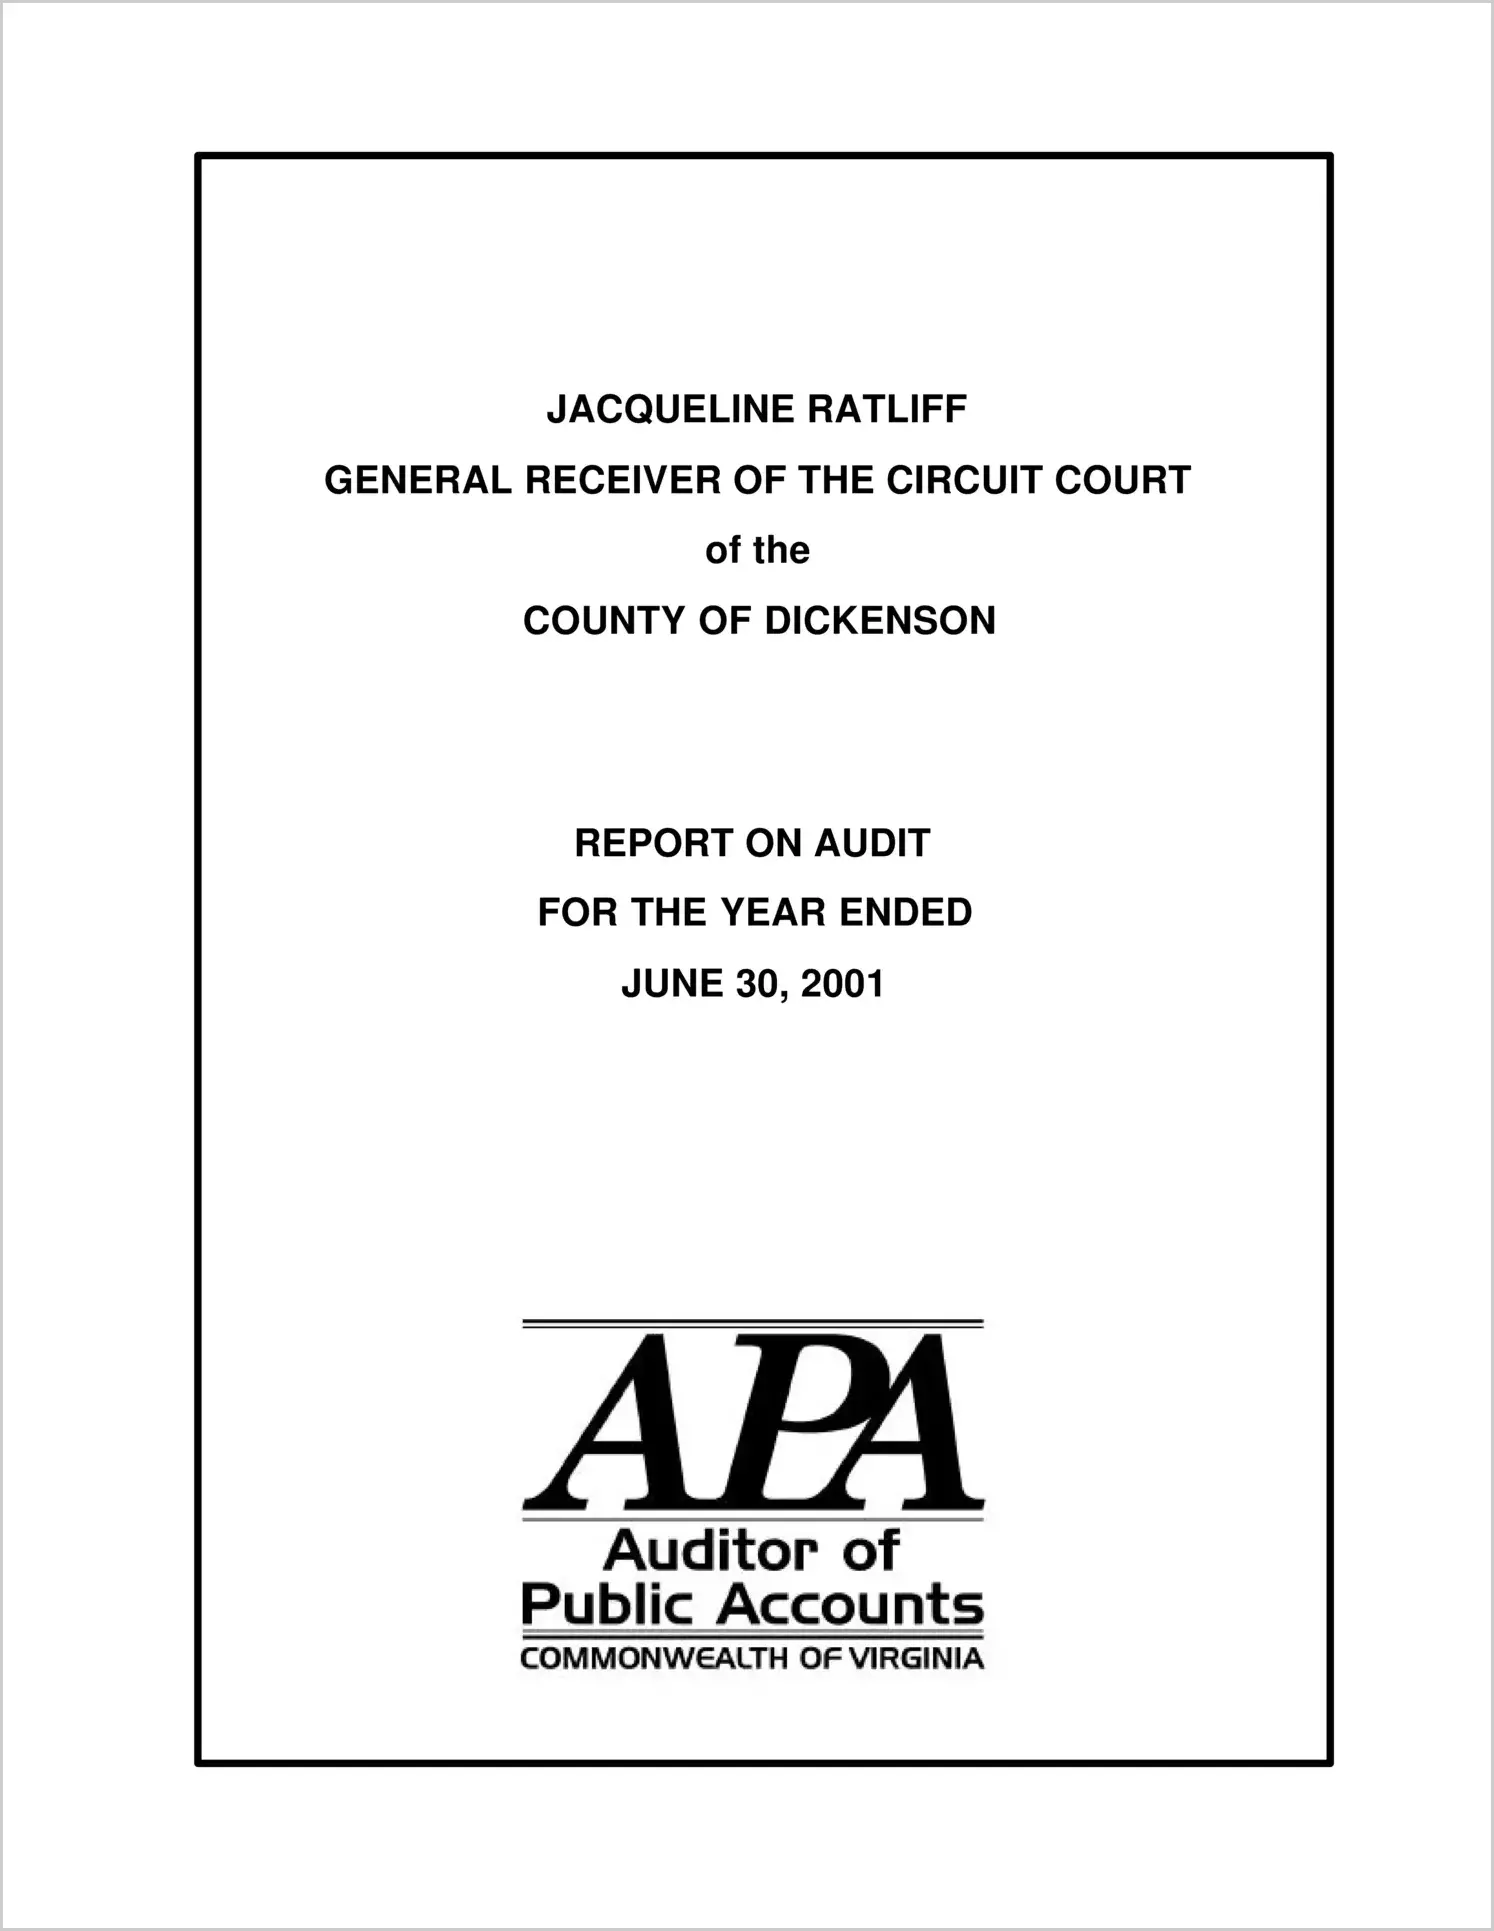 General Receiver of the Circuit Court of the County of Dickenson for the year ended June 30, 2001